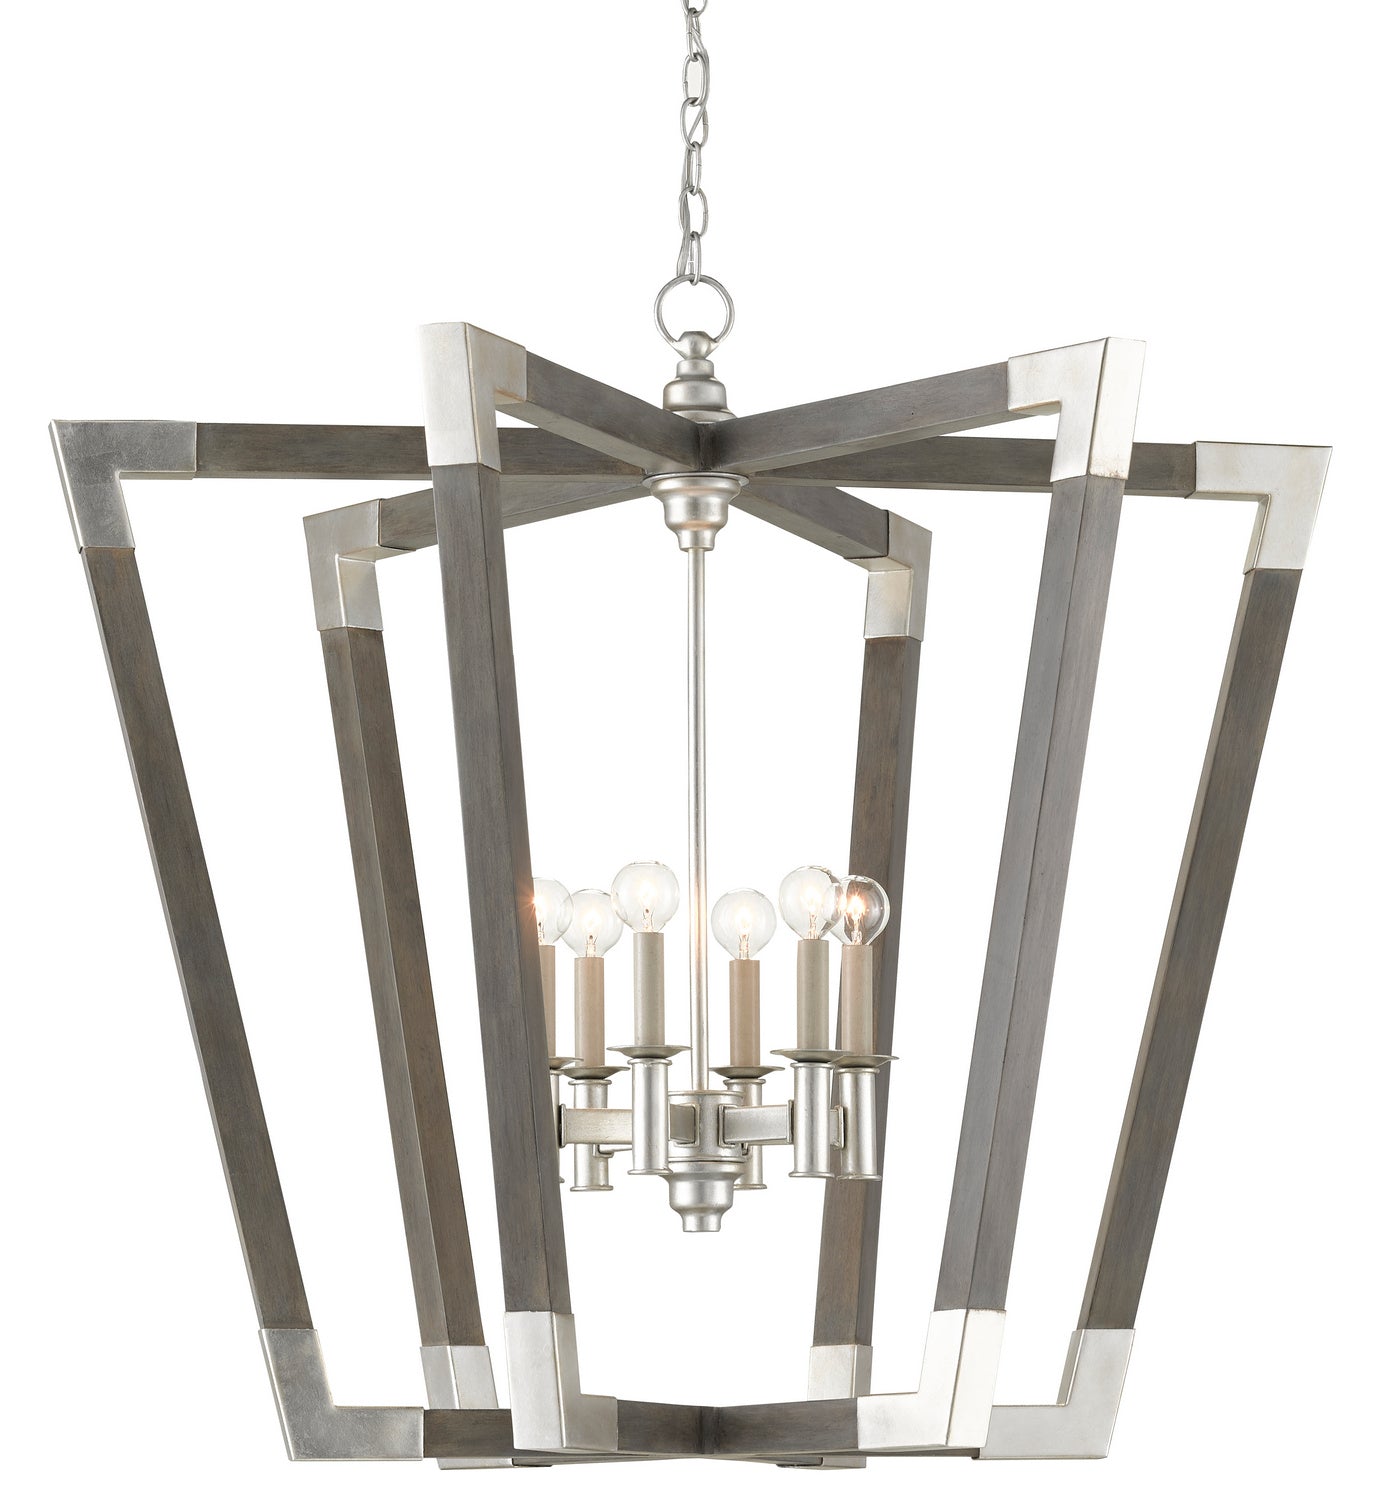 Six Light Chandelier from the Bastian collection in Chateau Gray/Contemporary Silver Leaf finish